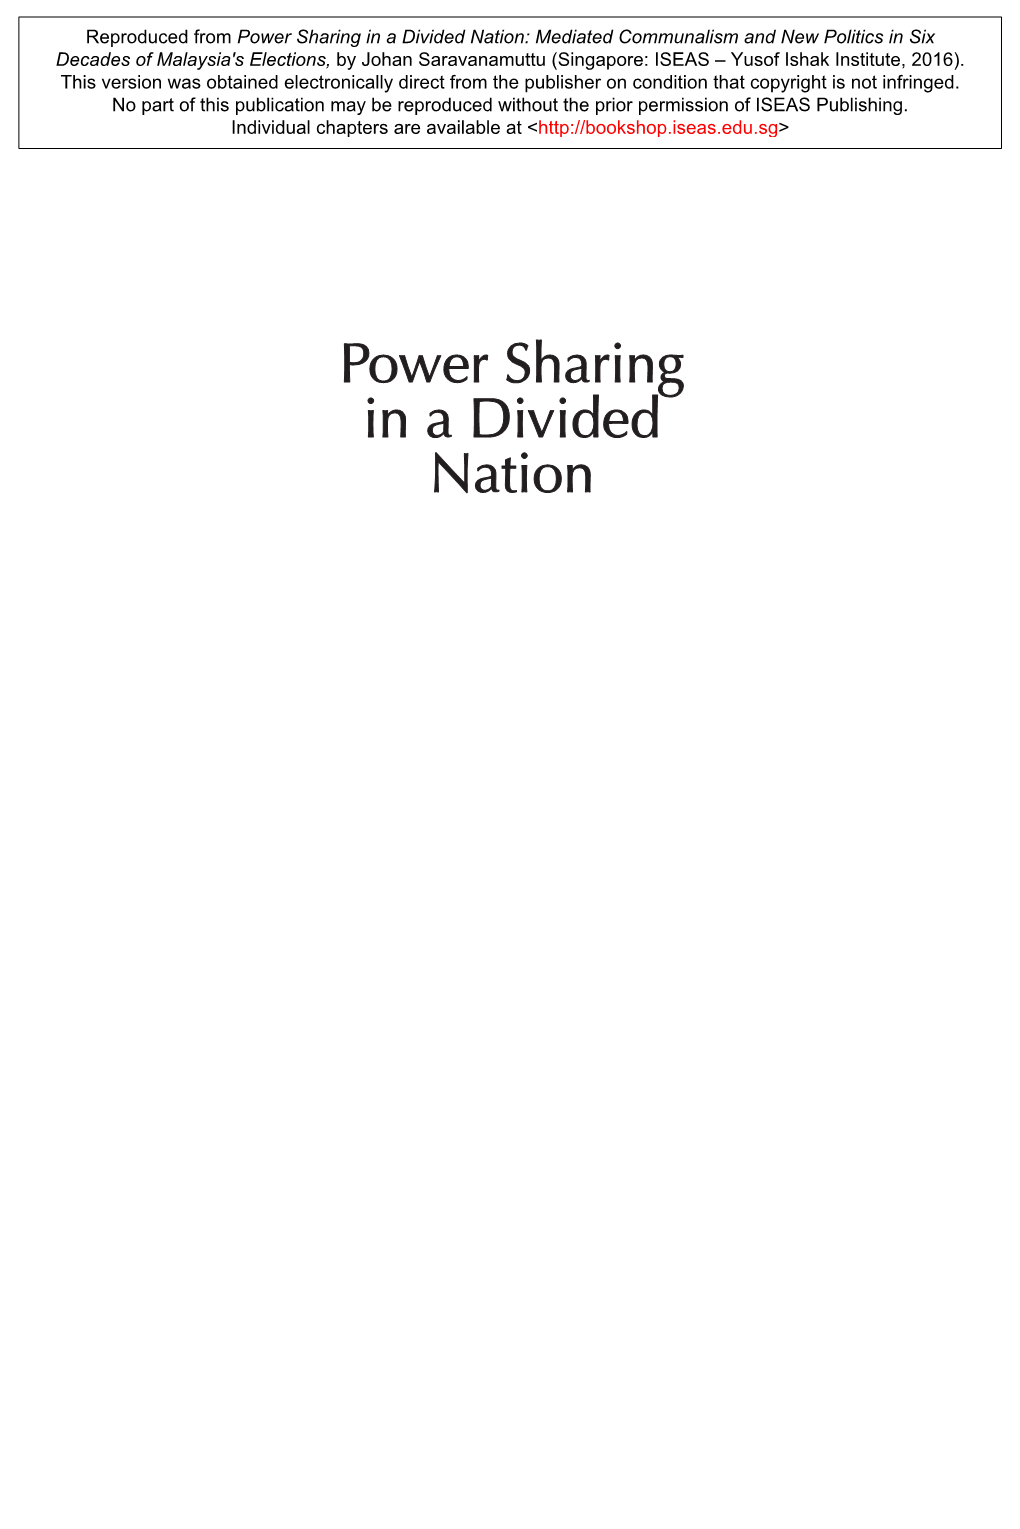 Power Sharing in a Divided Nation: Mediated Communalism and New